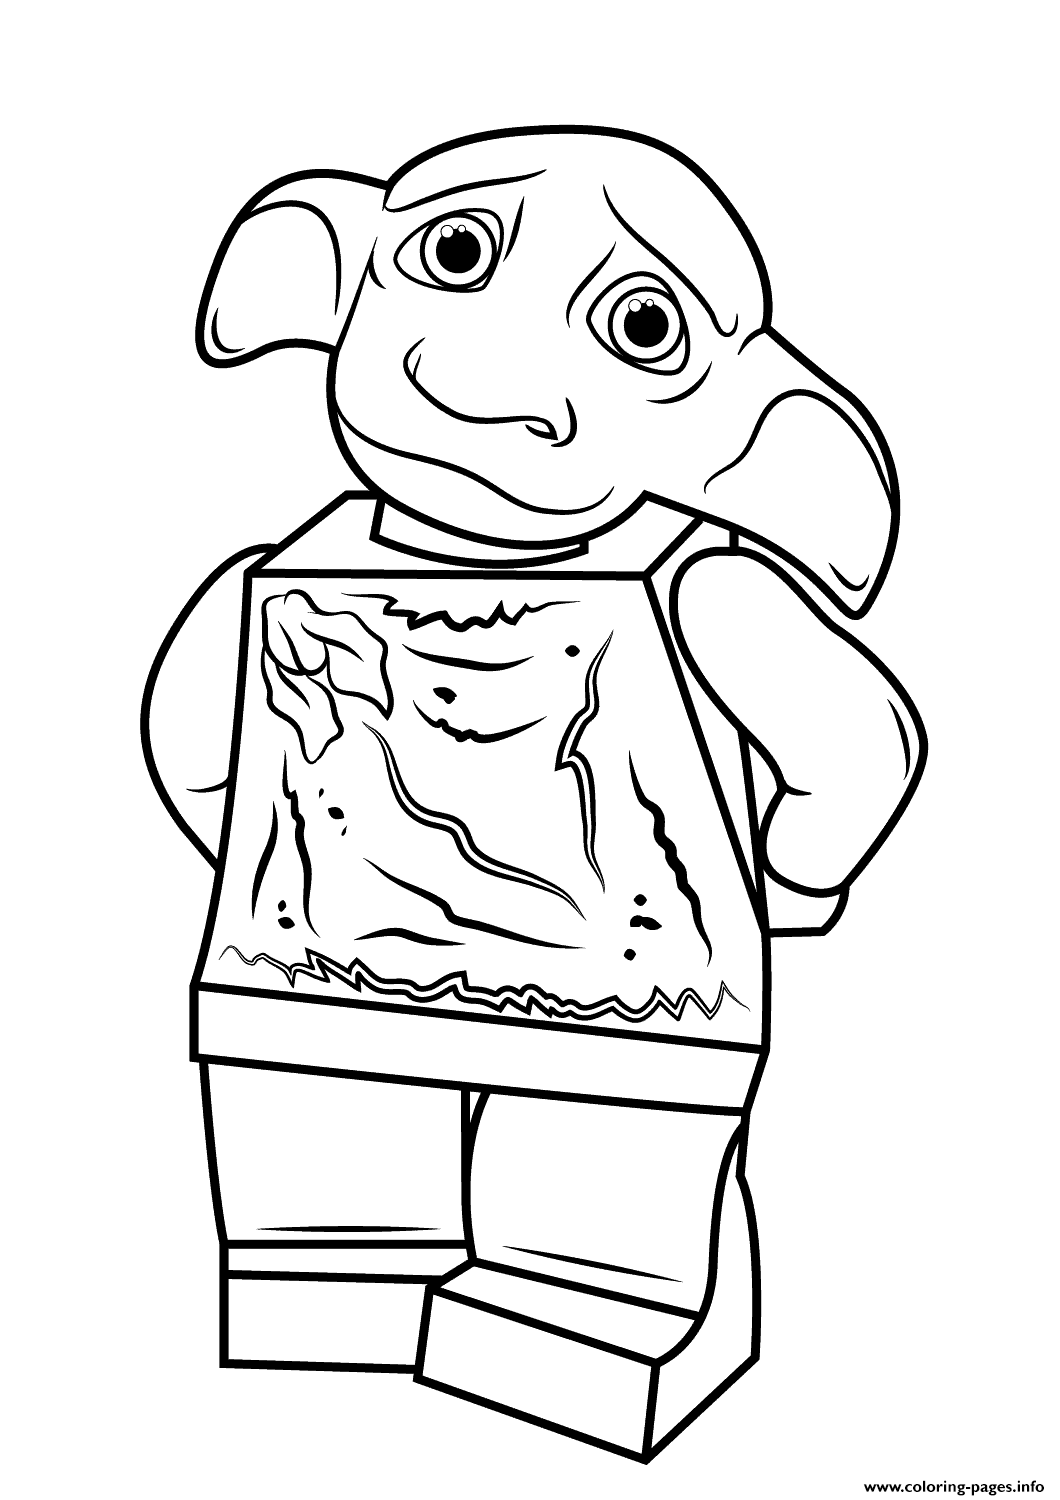 Lego Harry Potter Dobby coloring pages Print Download 429 prints